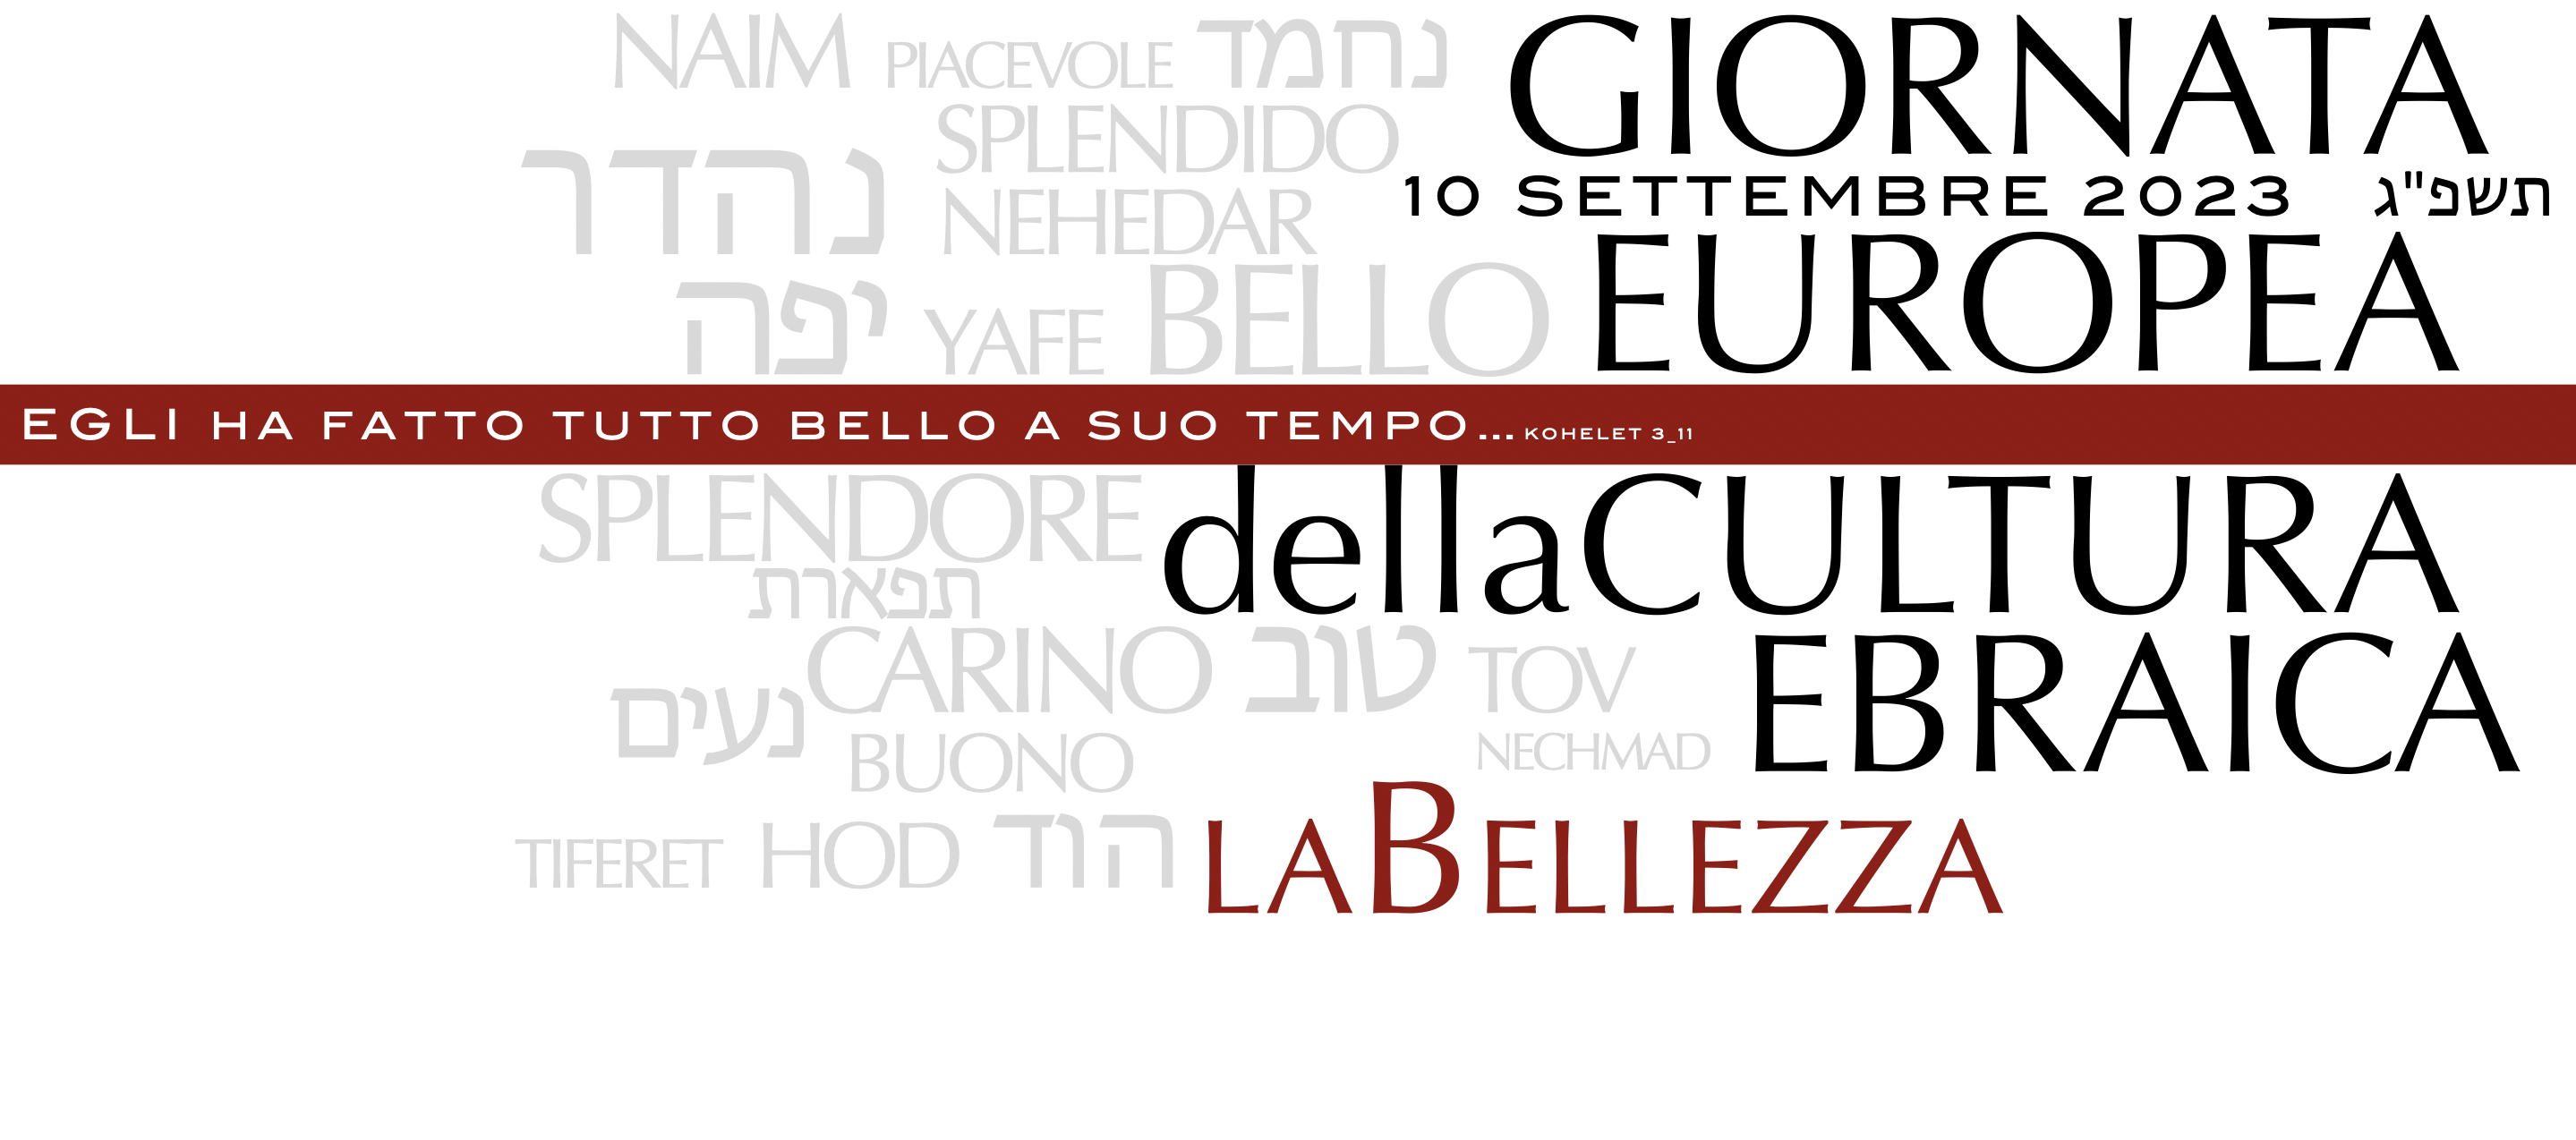 Italy: European Day of Jewish Culture 2023